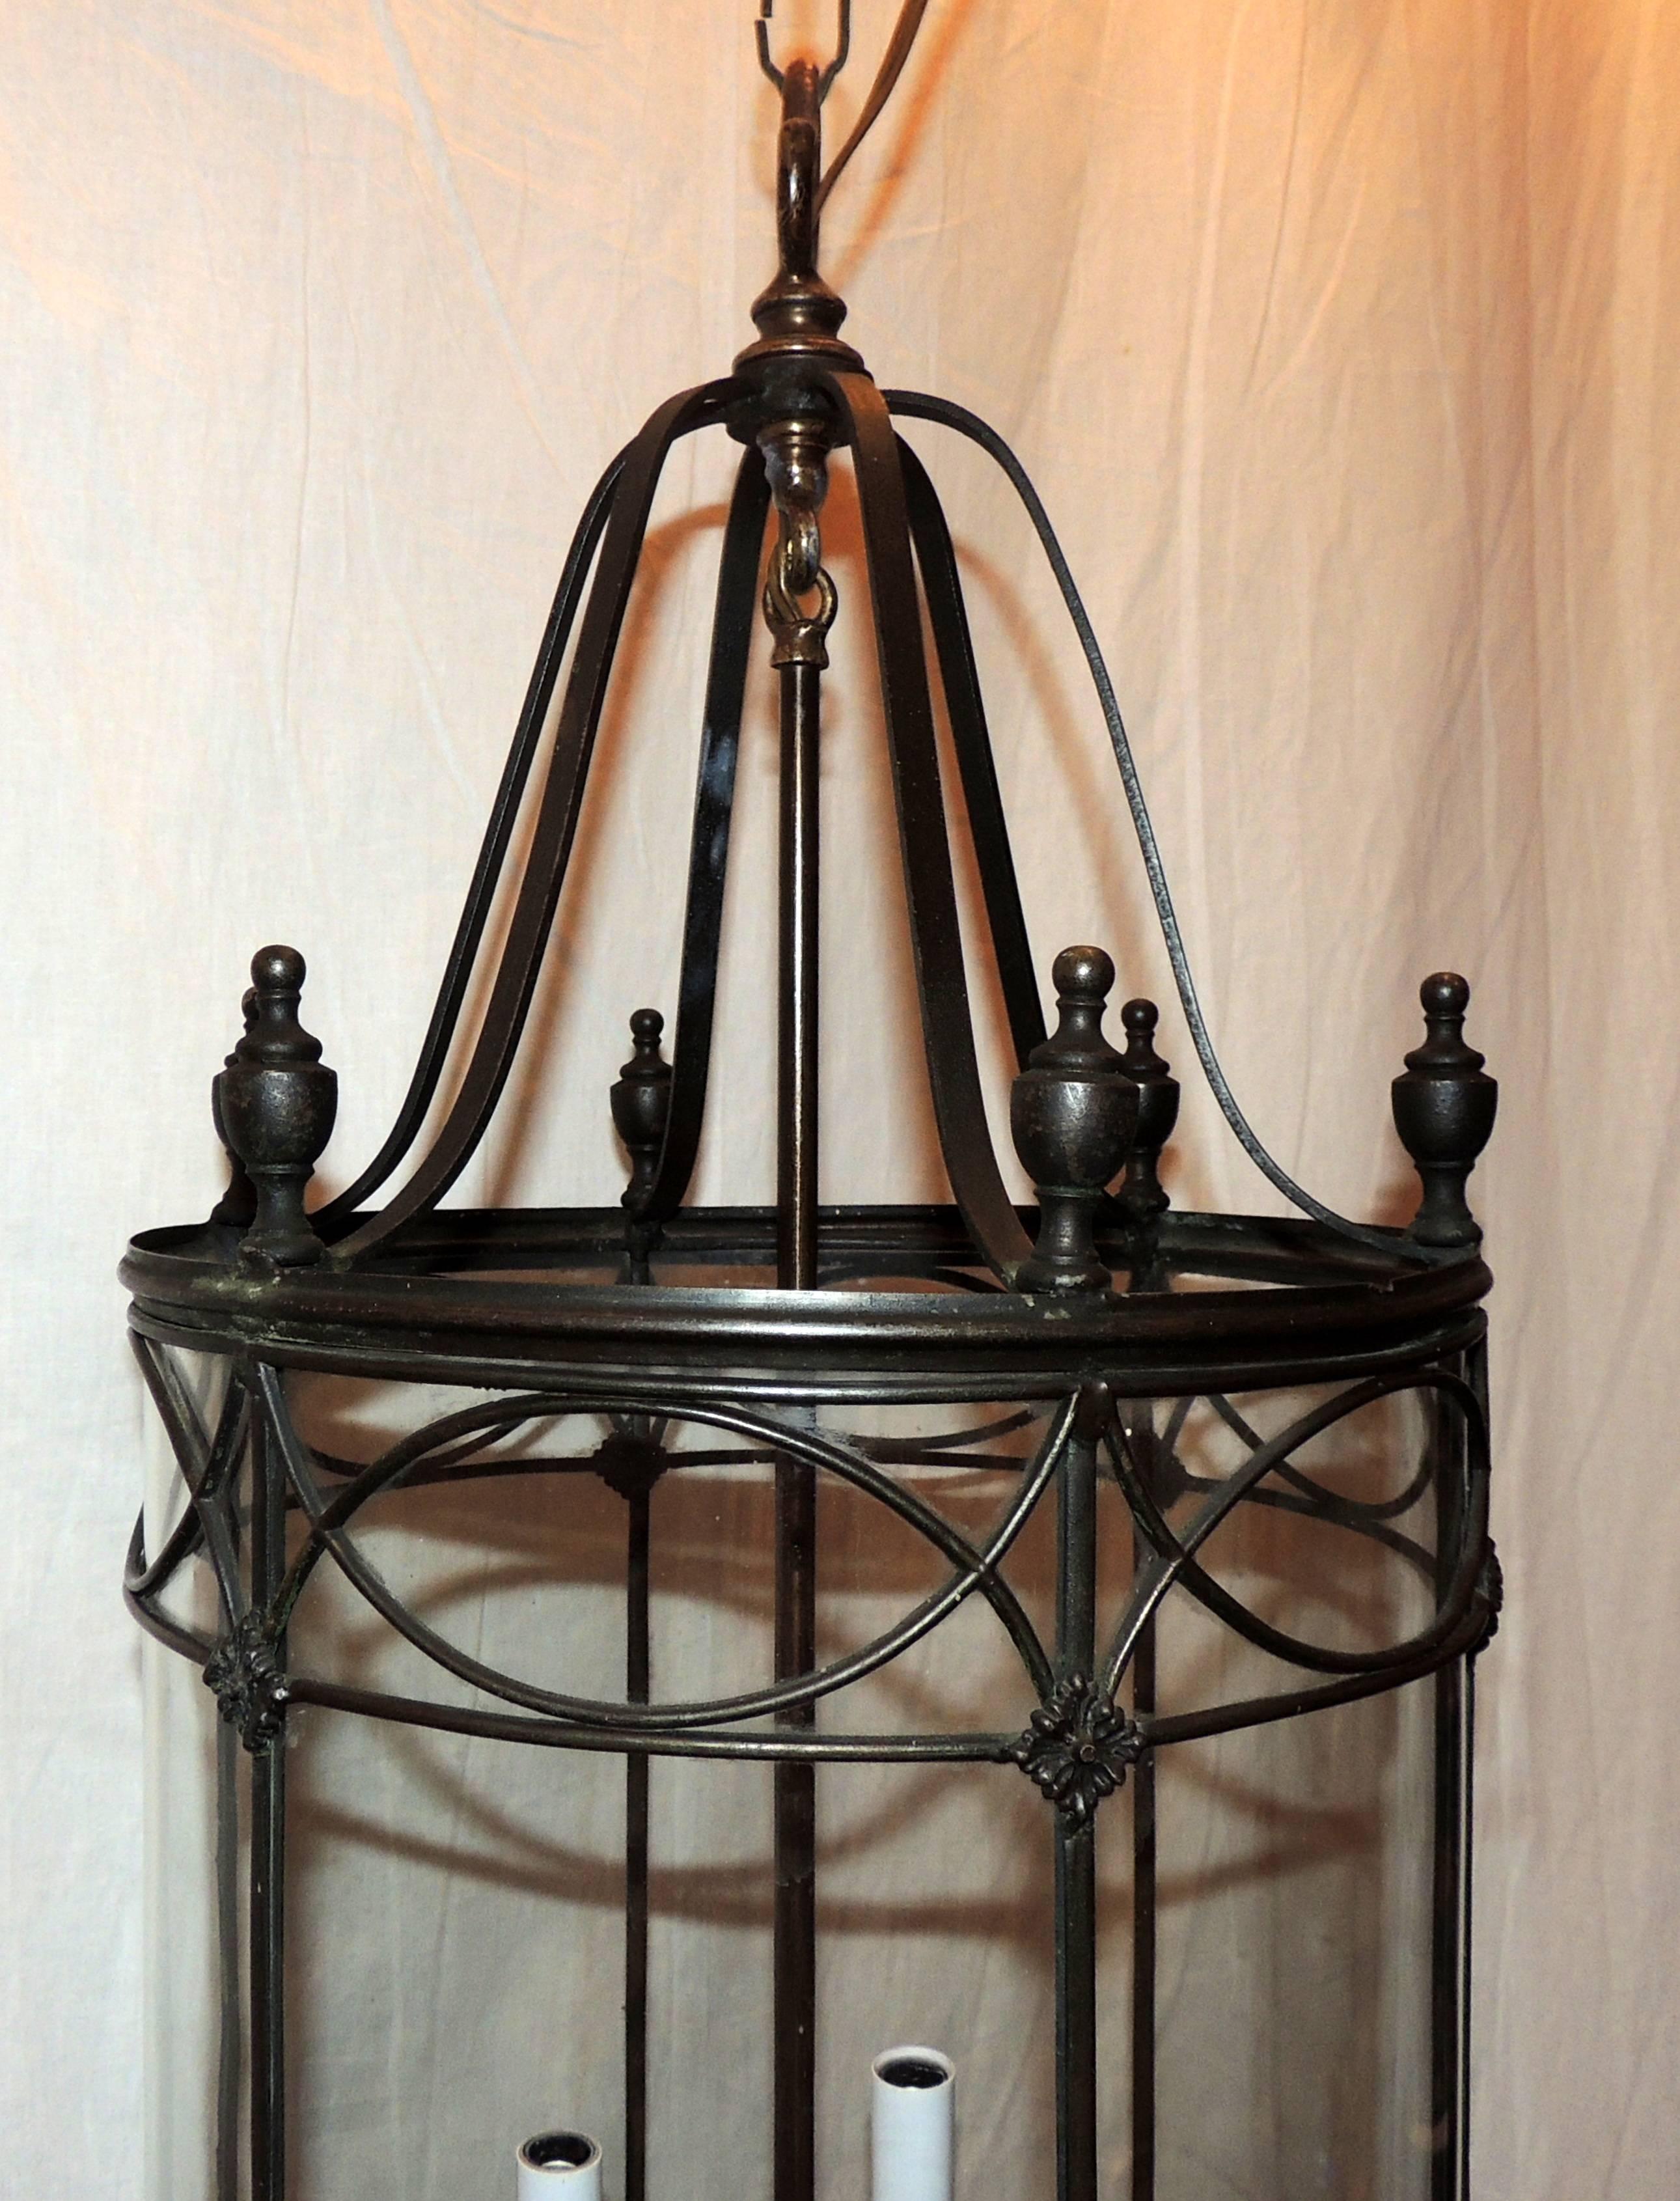 Neoclassical Bronze Panel Round Bent Glass Lantern Four-Light Caldwell Urn Fixture For Sale